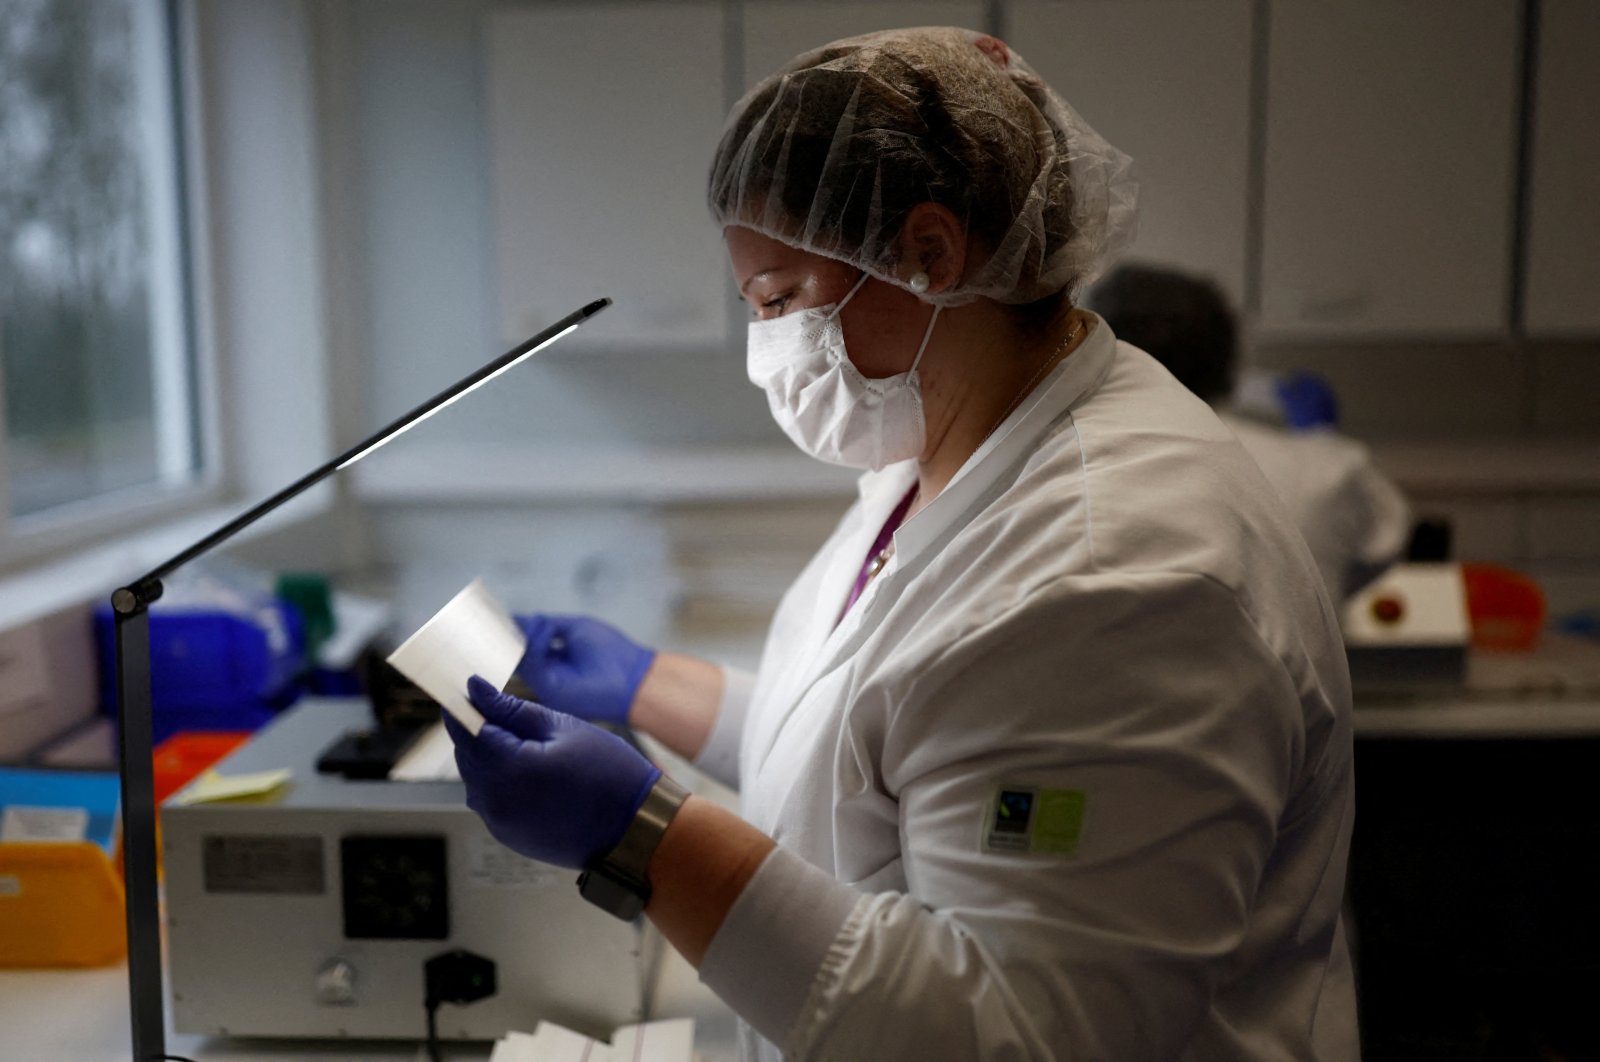 An employee works at the NG Biotech factory, which produces COVID-19 tests, in Guipry-Messac, France, Jan. 12, 2022. (Reuters Photo)